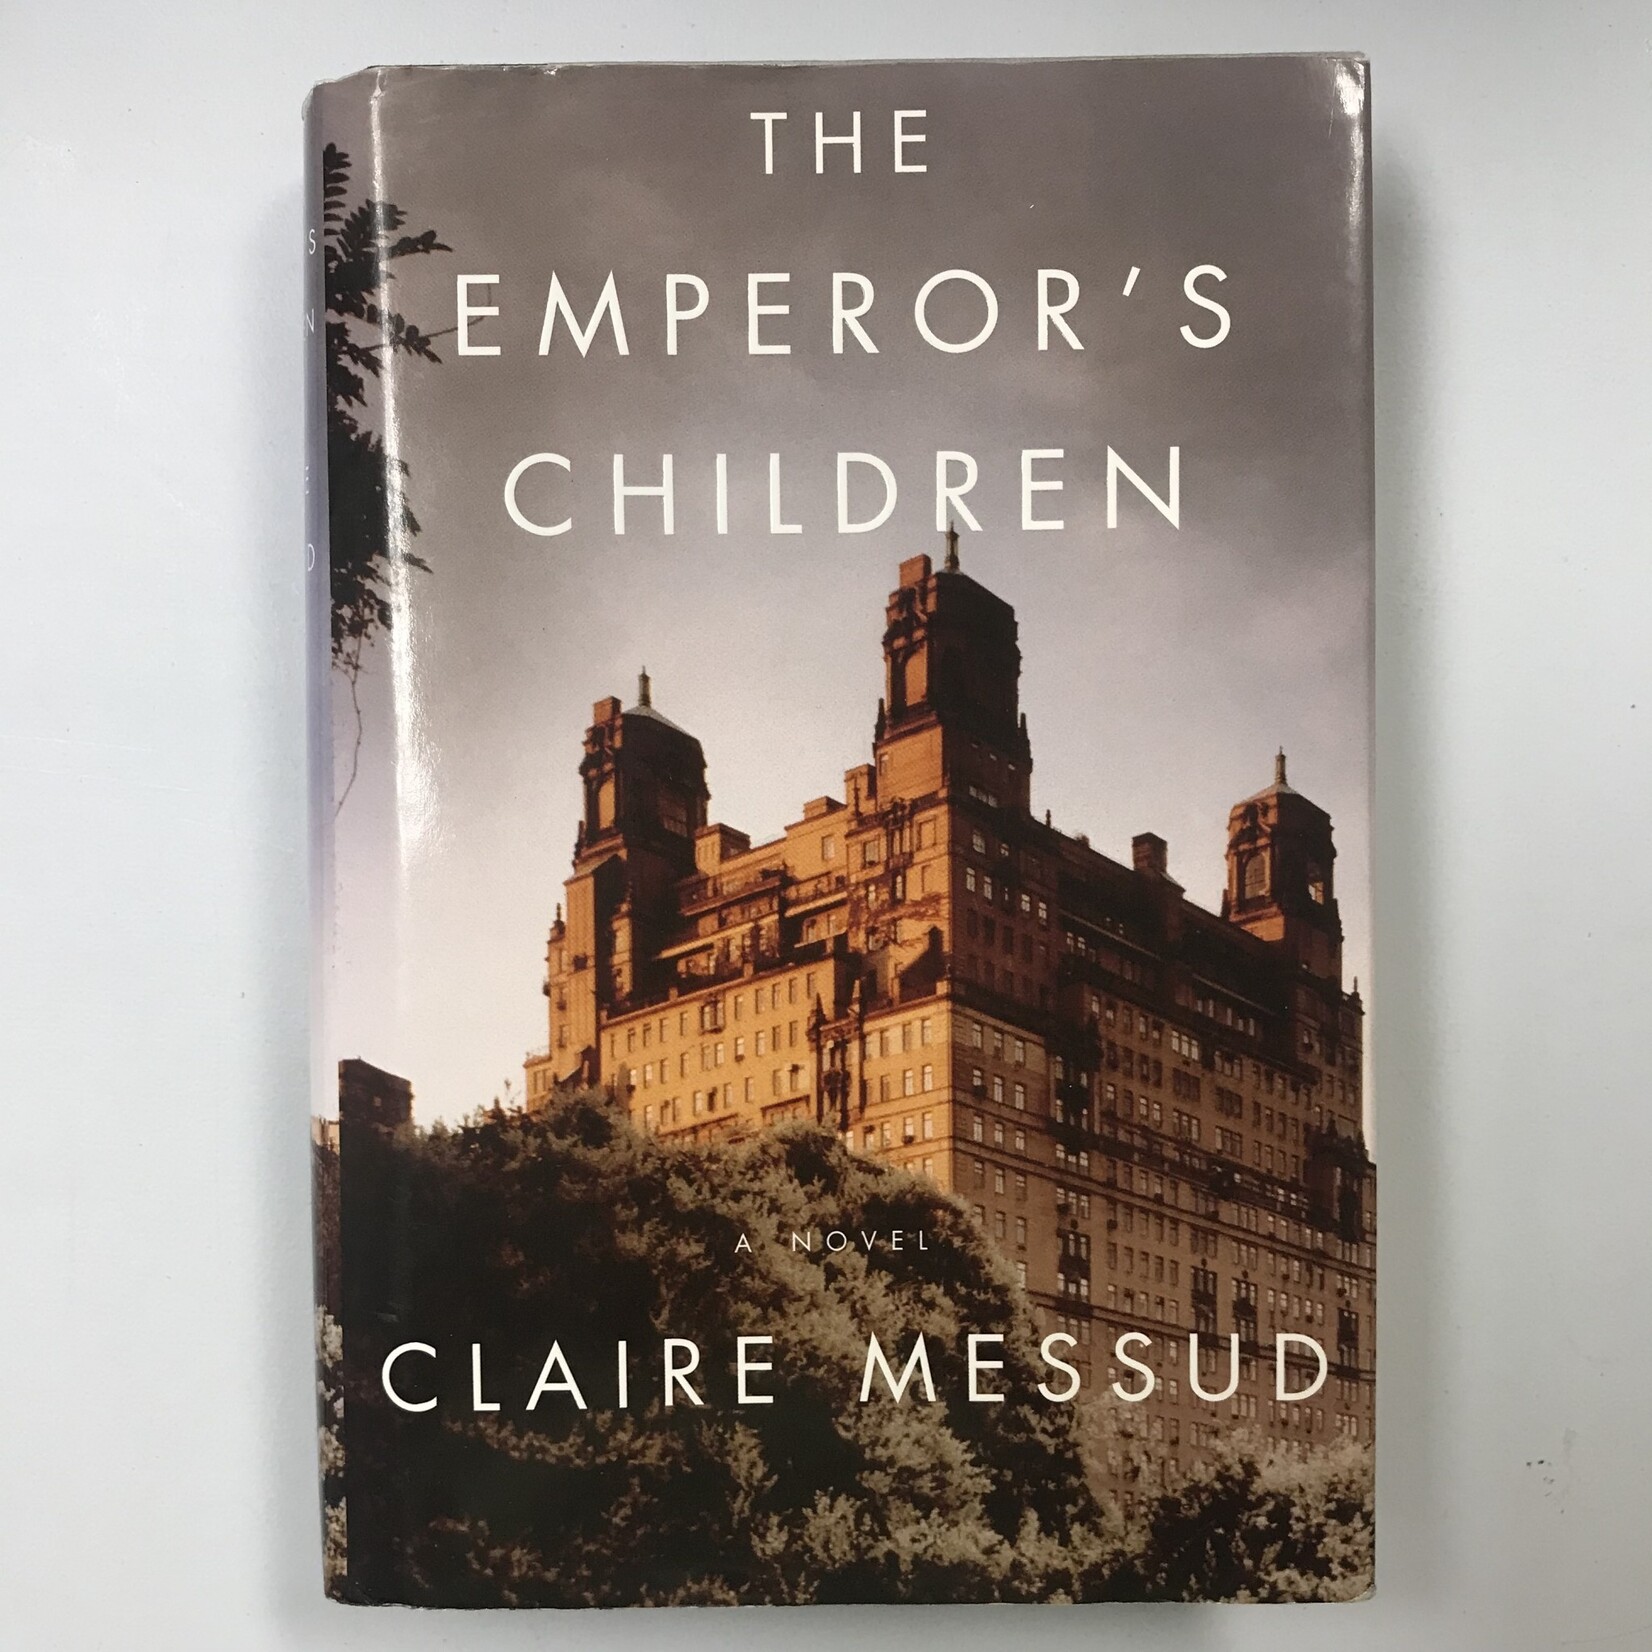 Claire Messud - The Emperor’s Children - Hardback (USED)